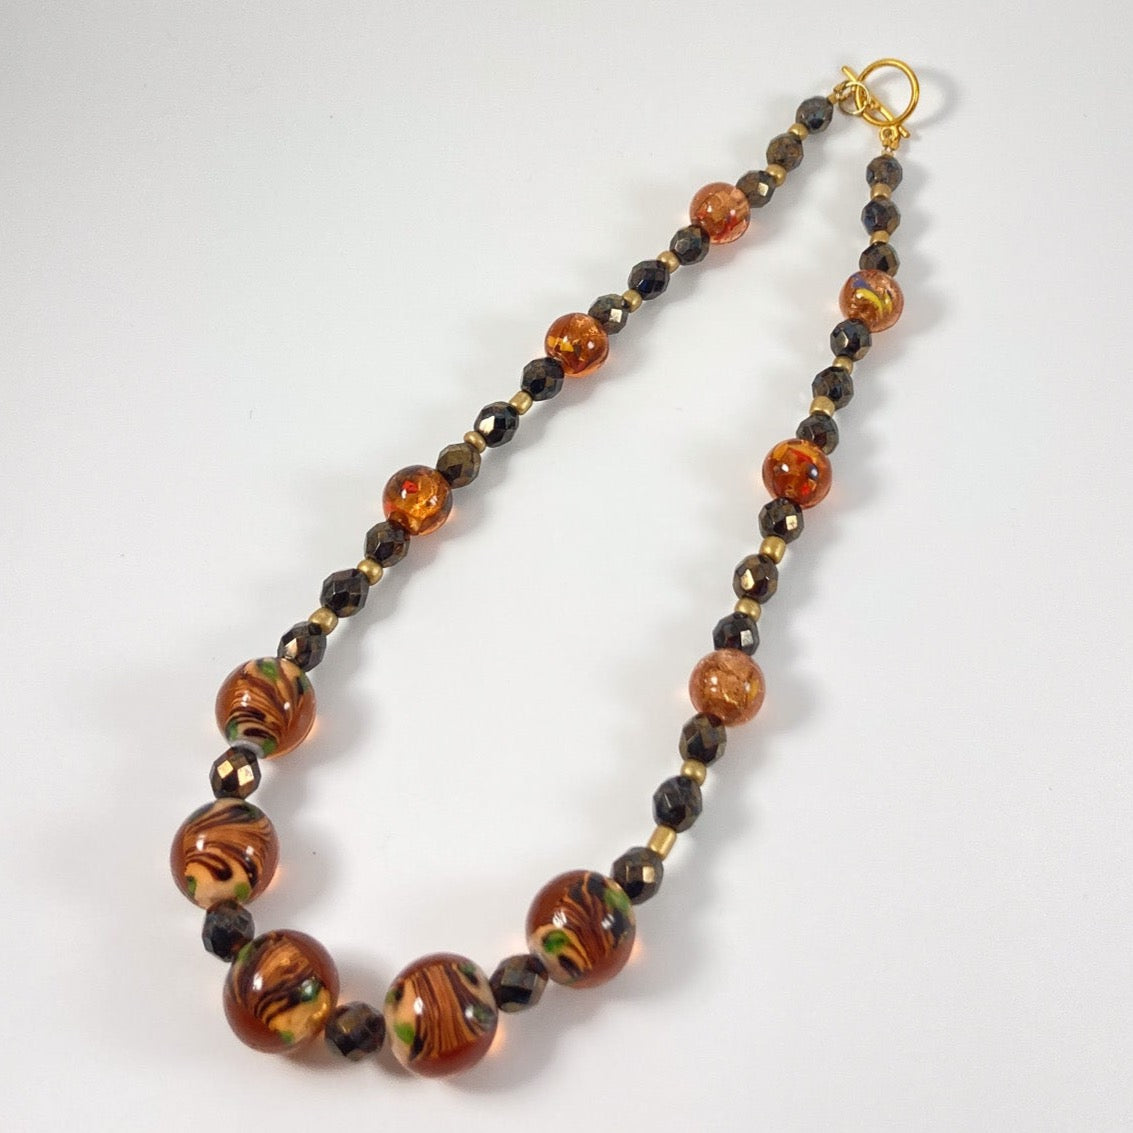 21S - Amberglass Necklace and Earring Set